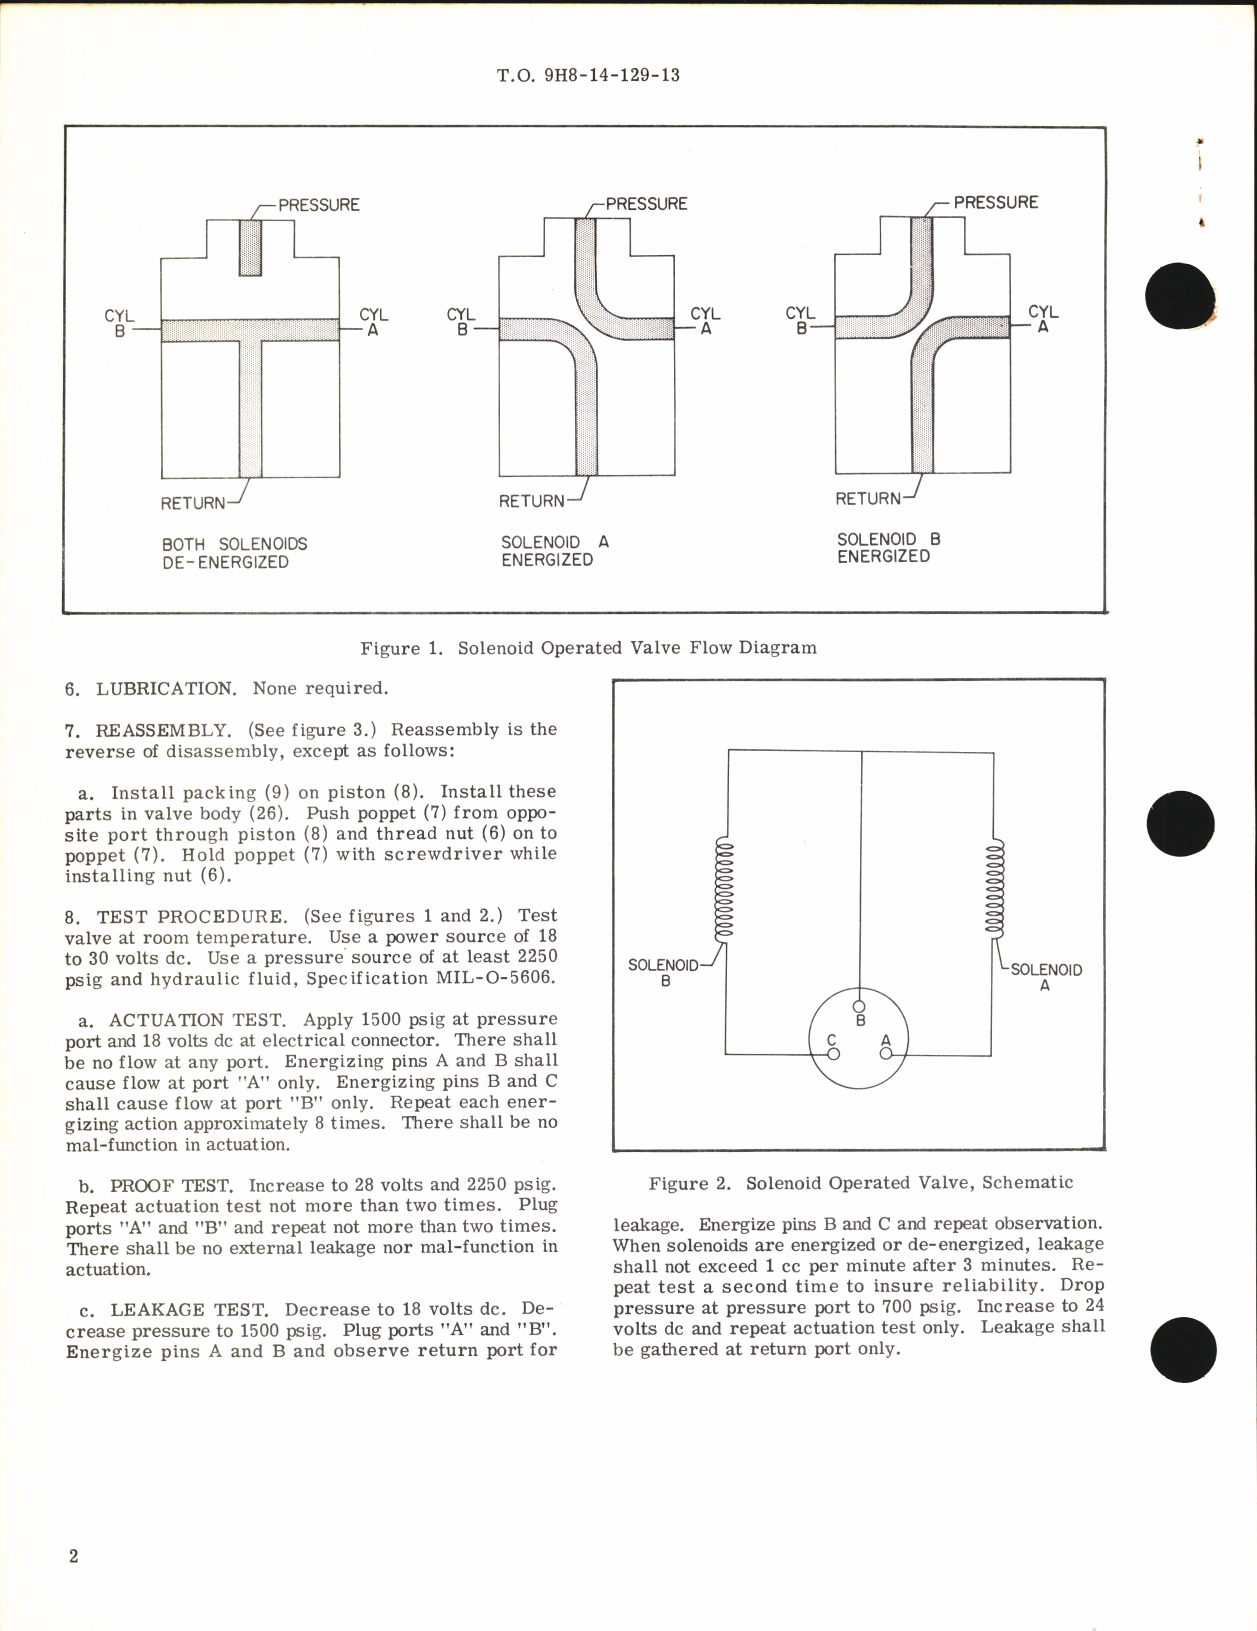 Sample page 2 from AirCorps Library document: Overhaul Instructions with Parts Breakdown for 4 way 3 Position Solenoid Operated Valve Part No. 8-U-8012